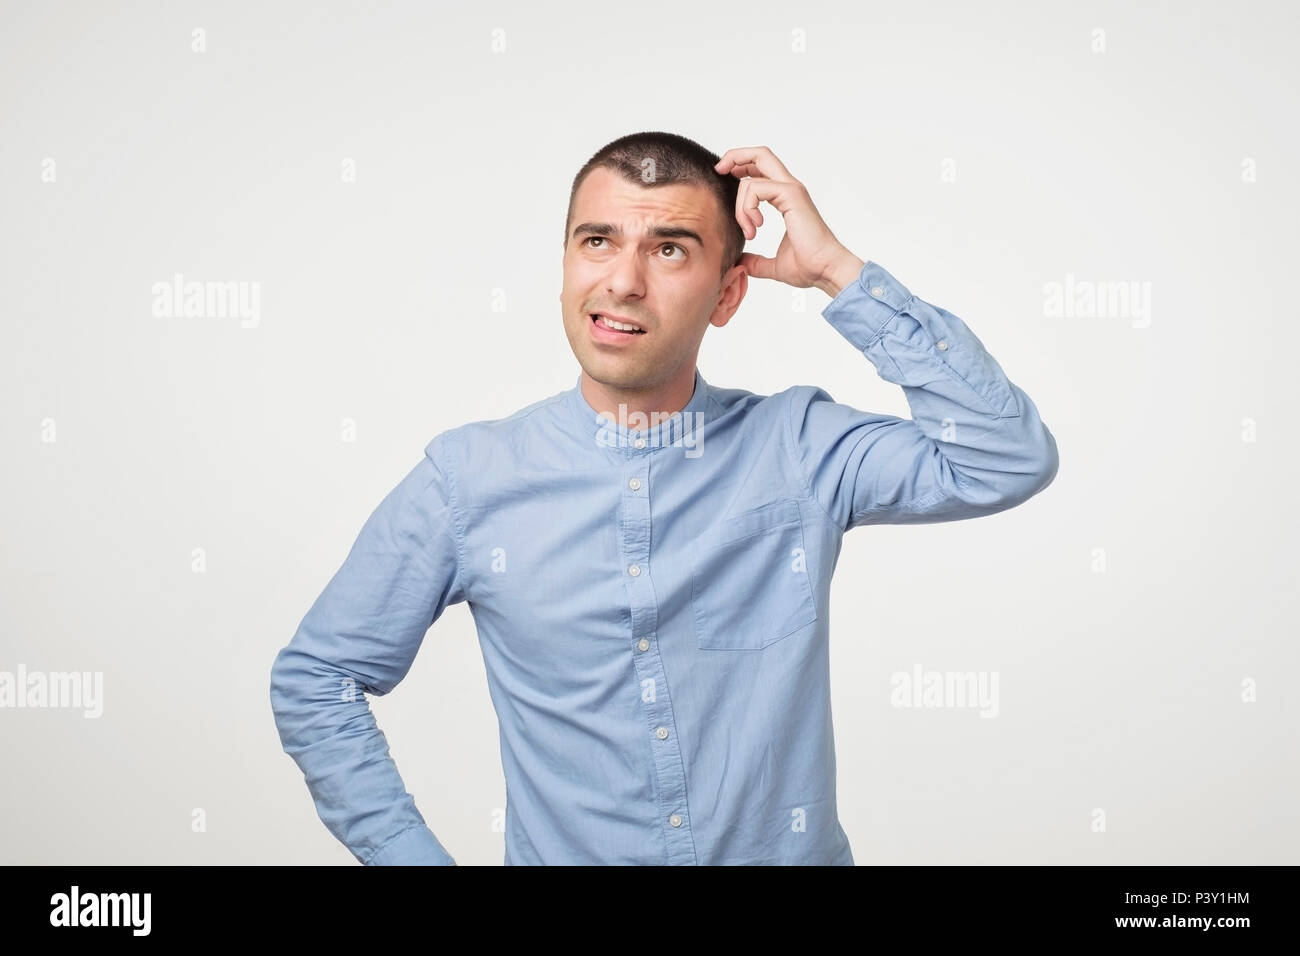 Handsome spanish guy in blue shirt, frowning and looking unsatisfied while scratching head, standing over gray background. He can not remember some fa Stock Photo